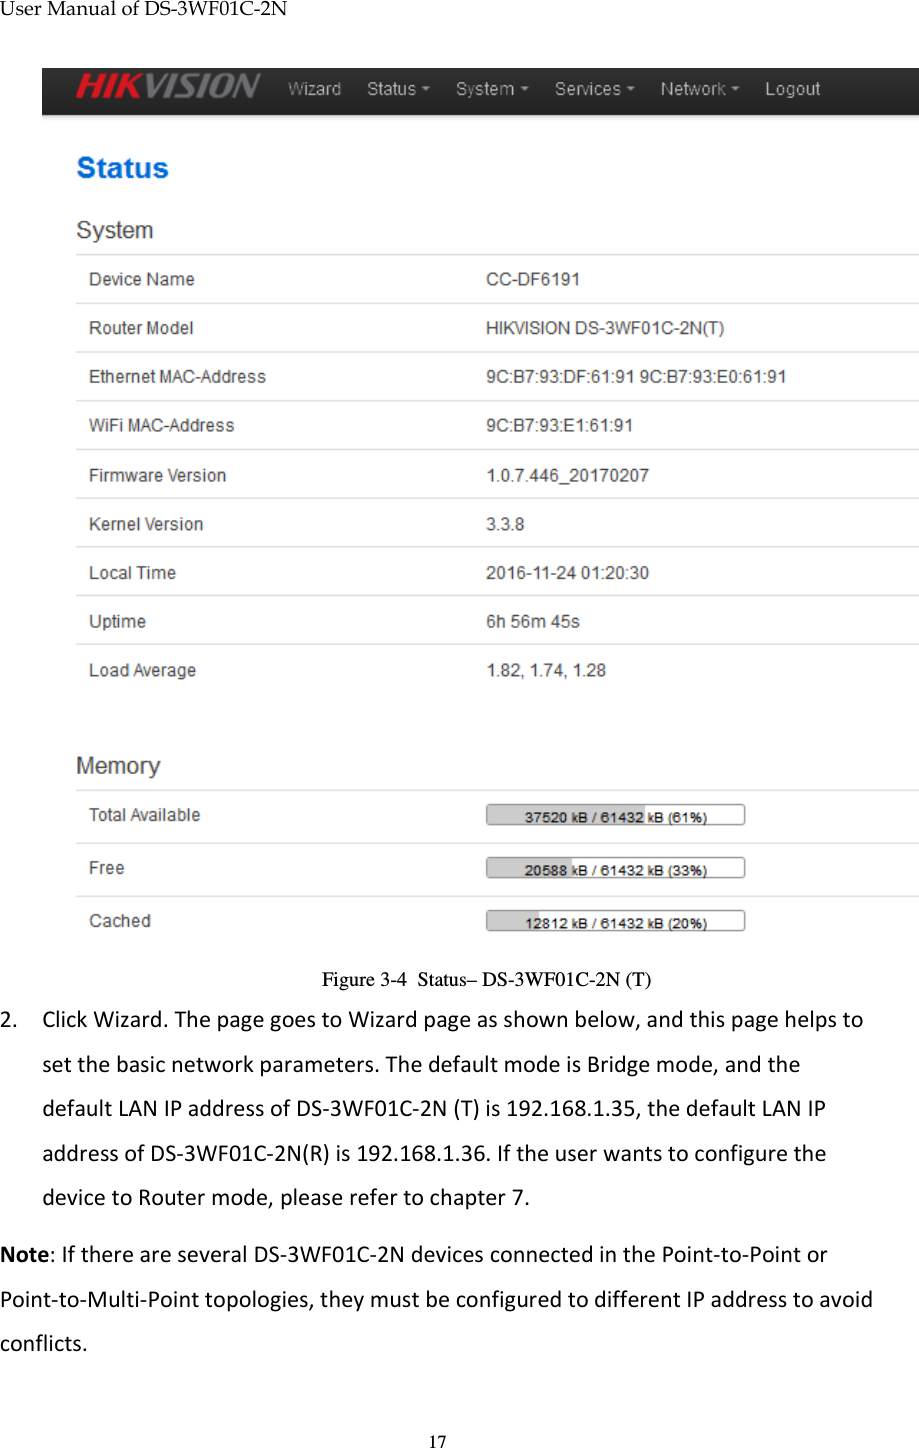 User Manual of DS-3WF01C-2N   17                   Figure 3-4  Status– DS-3WF01C-2N (T) 2. Click Wizard. The page goes to Wizard page as shown below, and this page helps to set the basic network parameters. The default mode is Bridge mode, and the default LAN IP address of DS-3WF01C-2N (T) is 192.168.1.35, the default LAN IP address of DS-3WF01C-2N(R) is 192.168.1.36. If the user wants to configure the device to Router mode, please refer to chapter 7. Note: If there are several DS-3WF01C-2N devices connected in the Point-to-Point or Point-to-Multi-Point topologies, they must be configured to different IP address to avoid conflicts. 